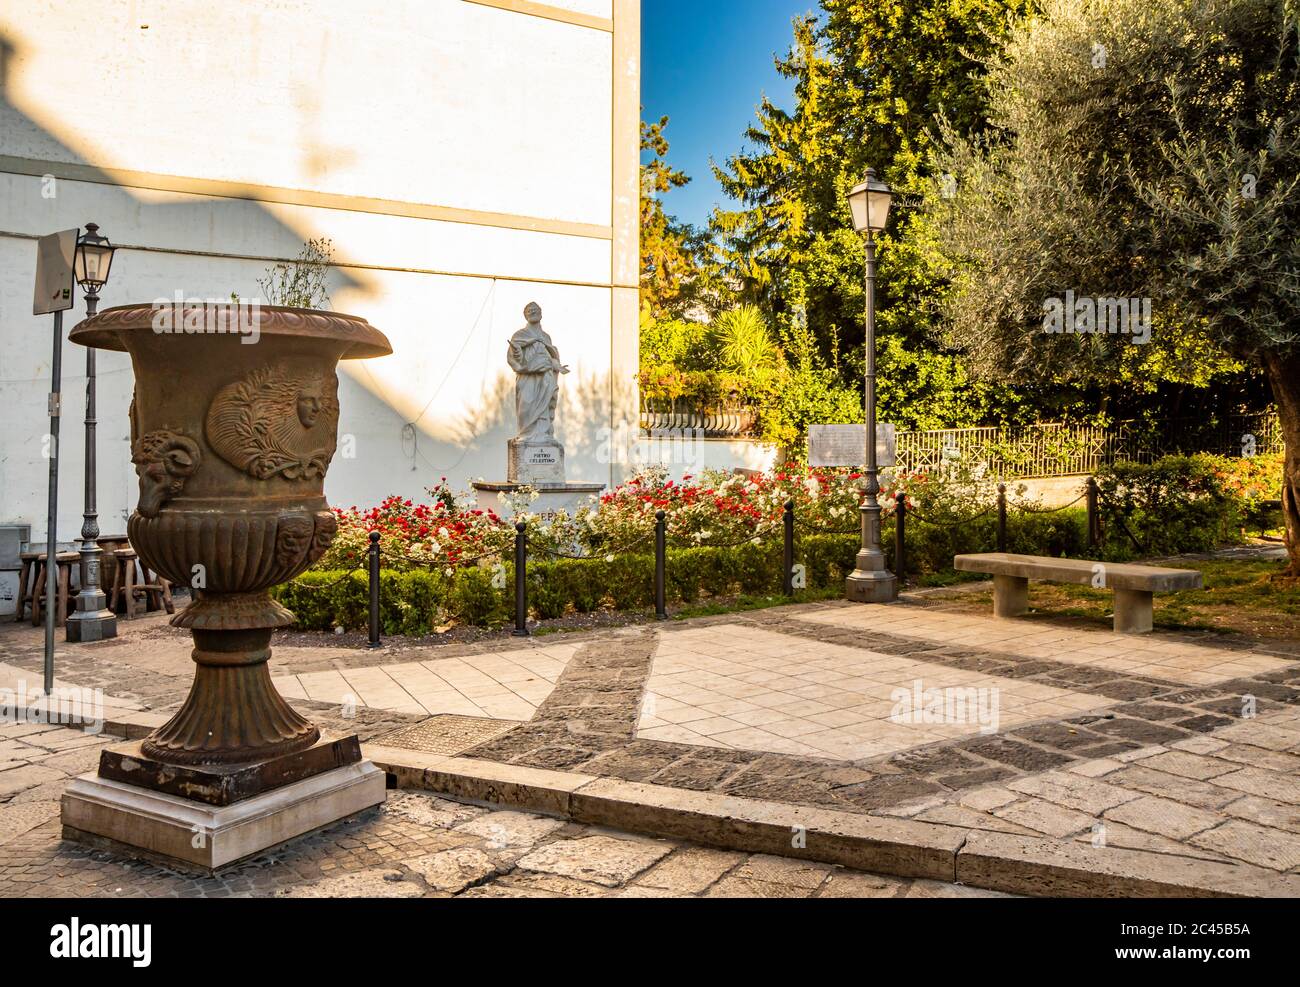 The statue of San Pietro Celestino in the garden of the homonymous square in the city of Isernia. A large bronze vase with the bas-relief of a human f Stock Photo